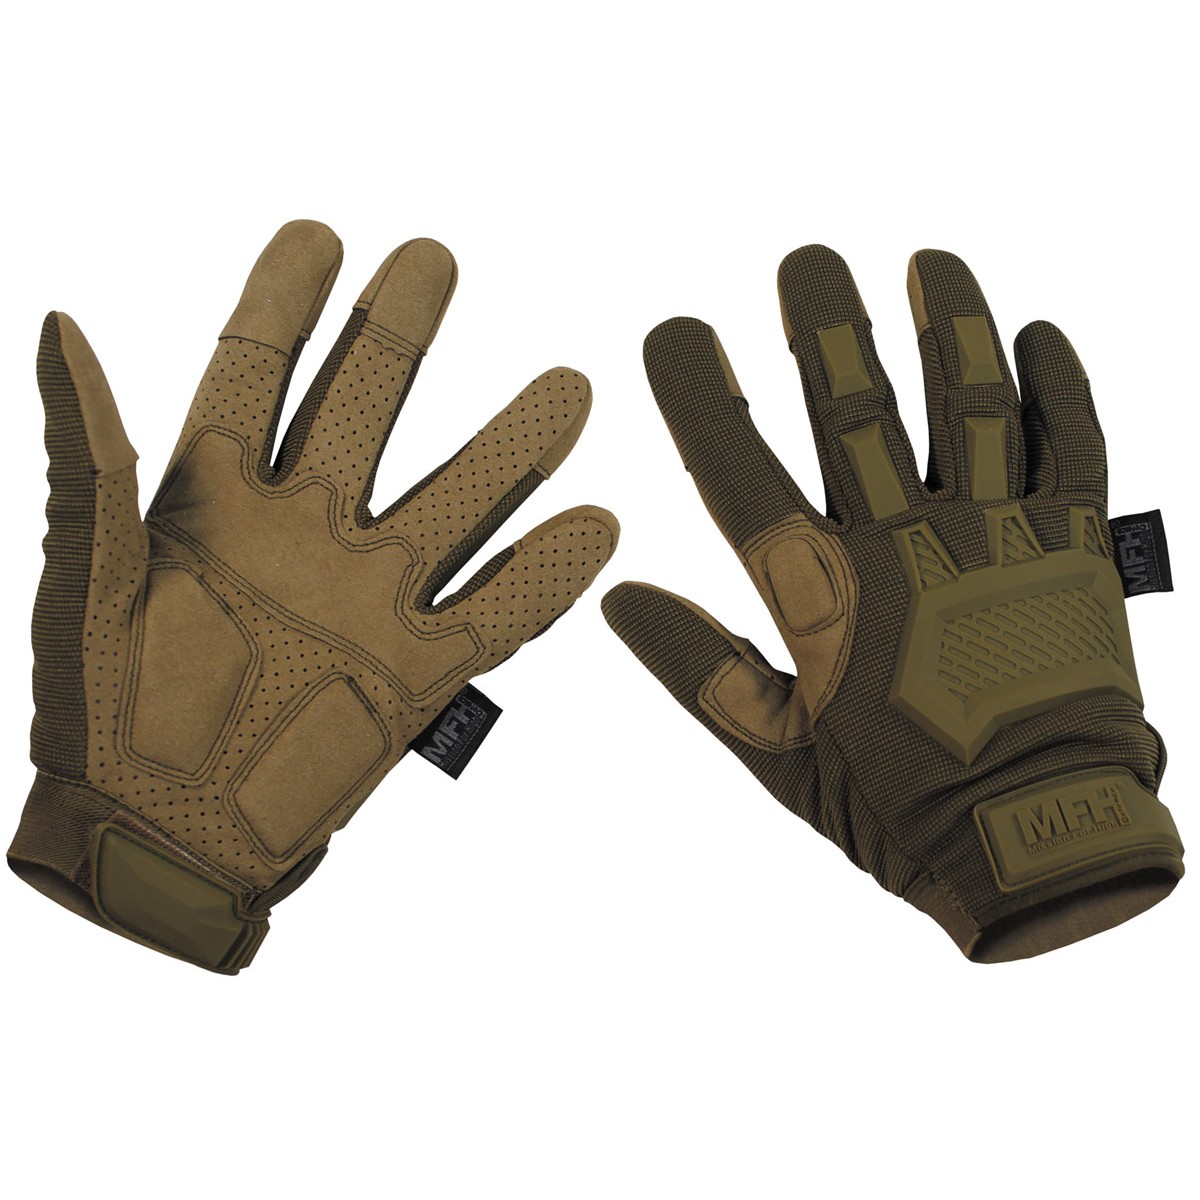 Tactical Military Shooting Profi Gloves - Coyote